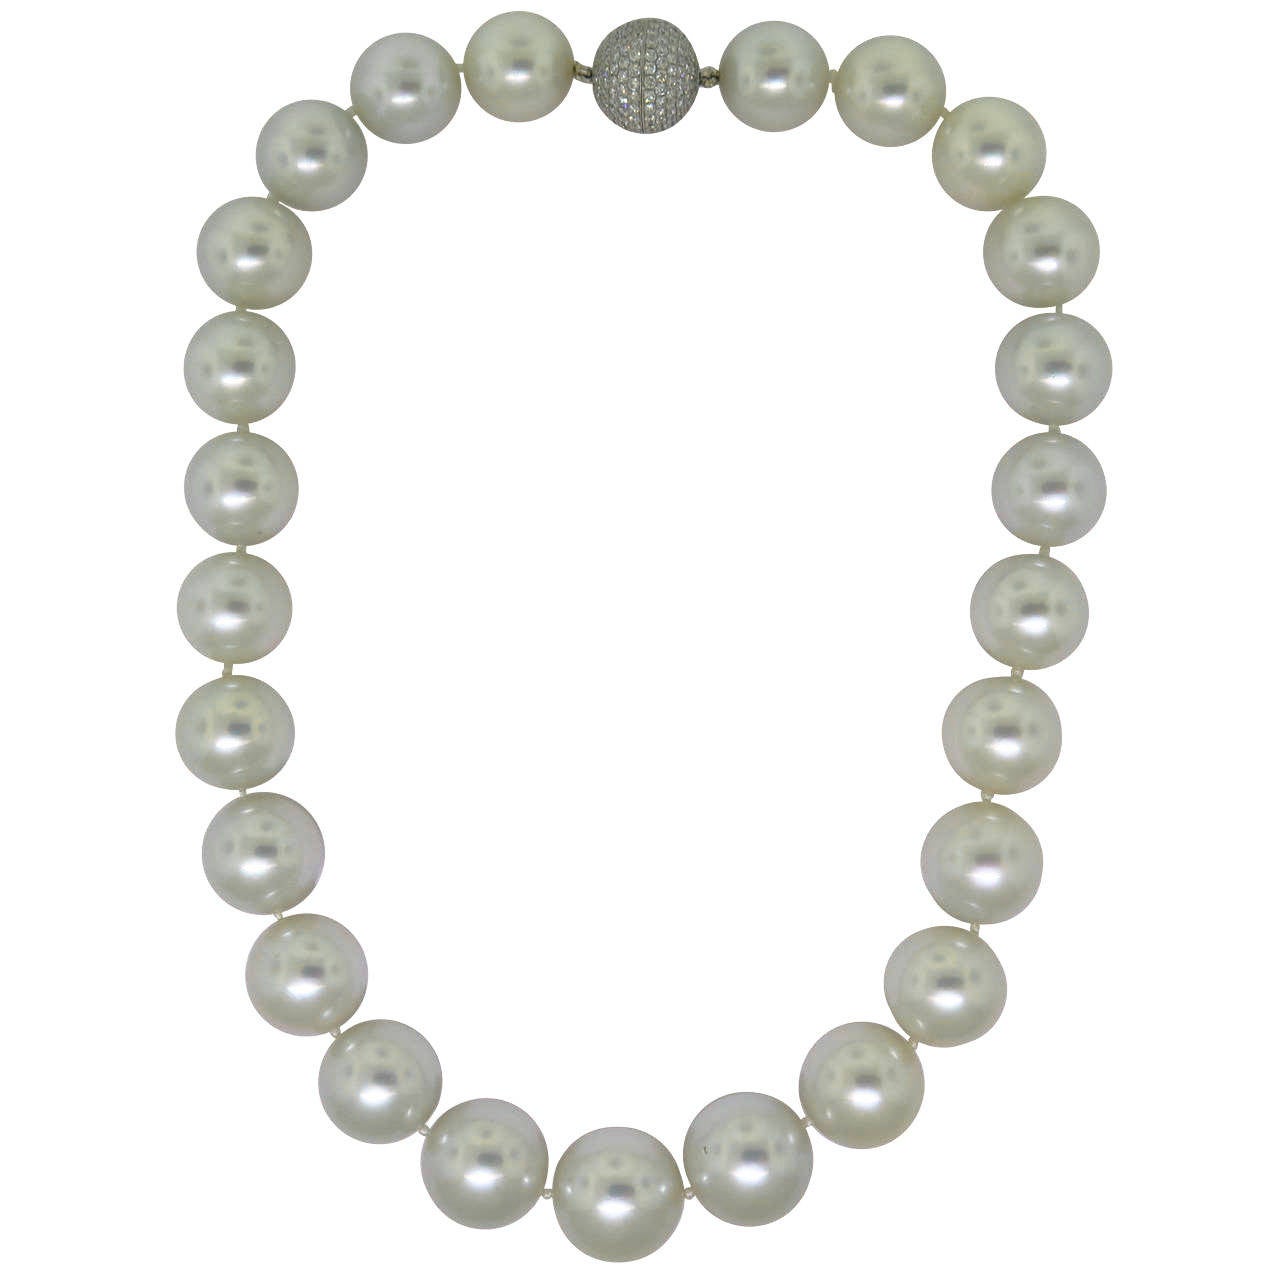 White Australian South Sea Pearls with a Diamond Gold Clasp